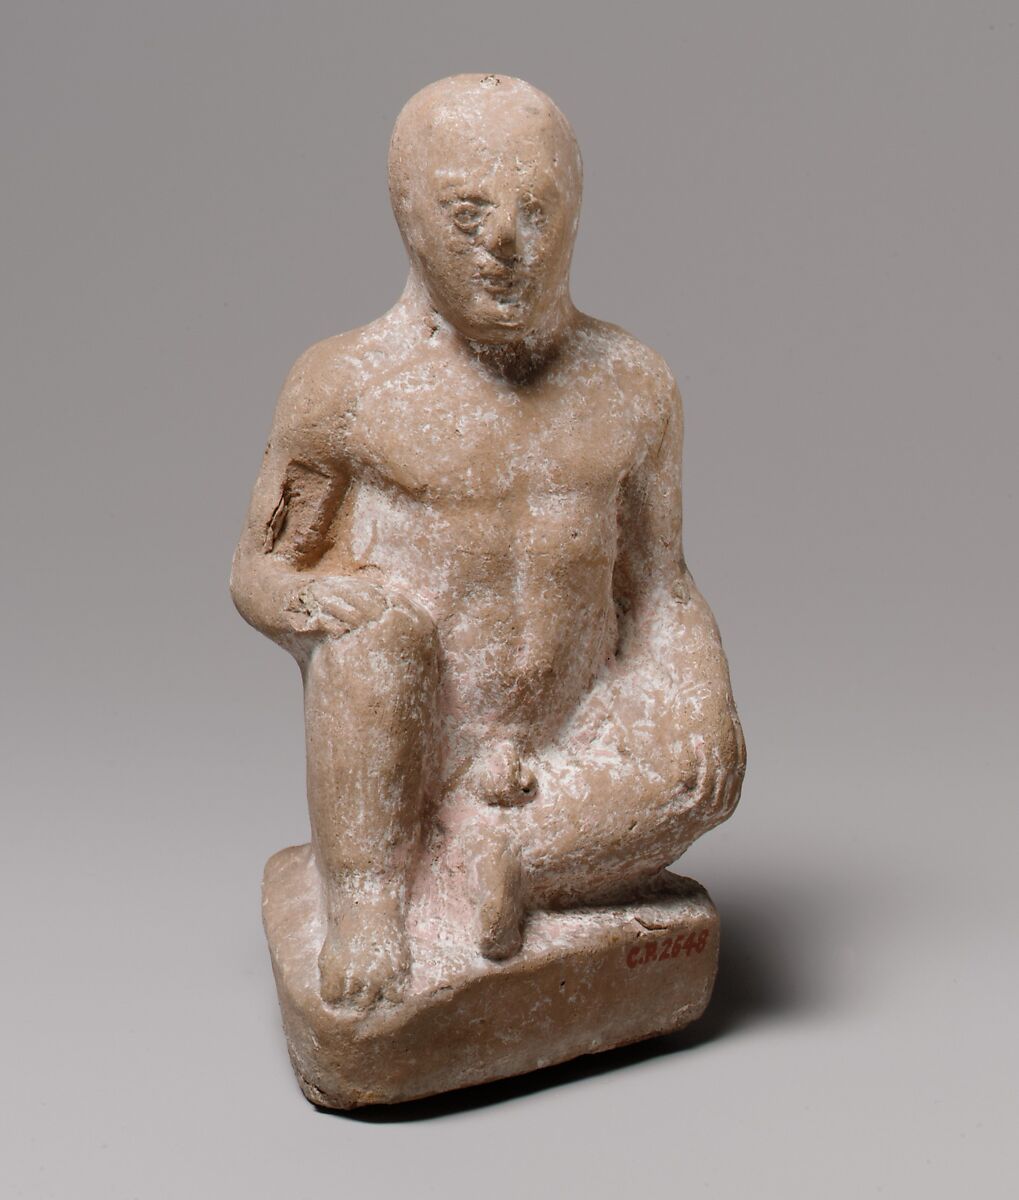 Terracotta statuette of a seated boy, Terracotta, Cypriot 